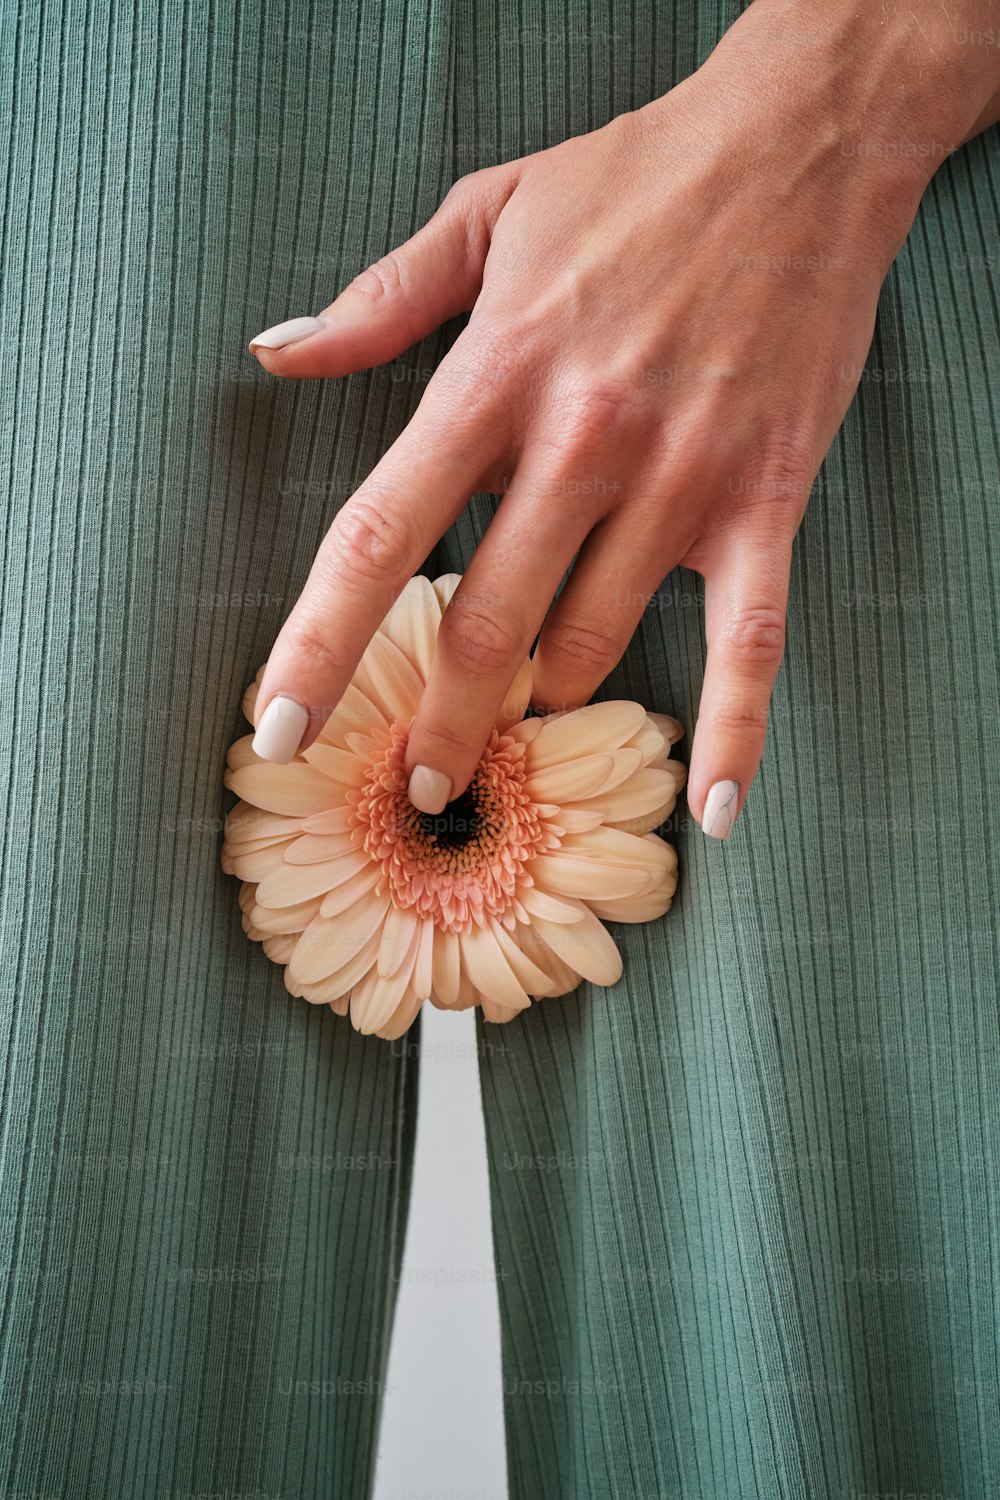 a woman's hand holding a flower in her pants